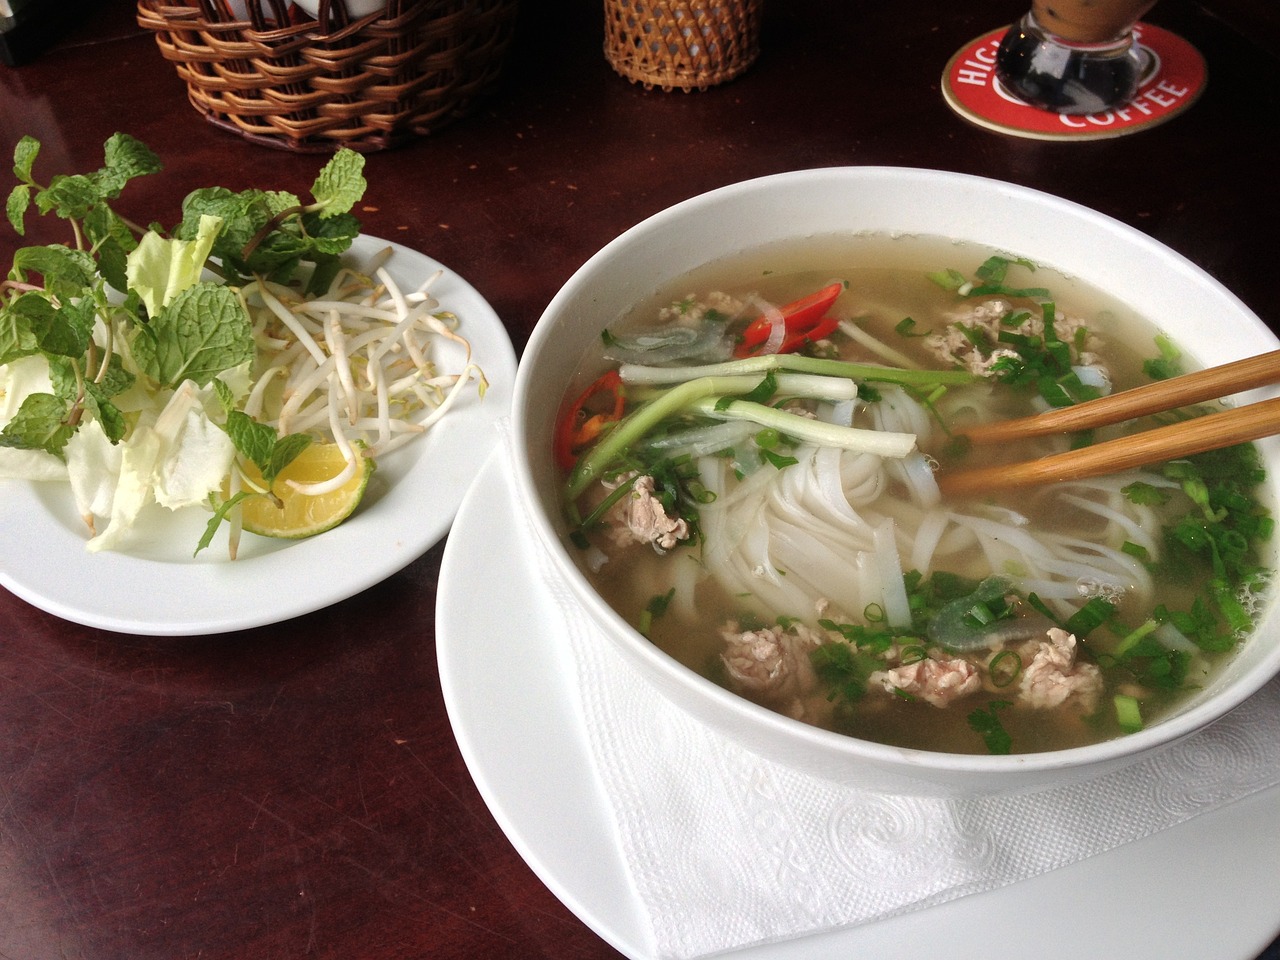 a bowl of soup and a plate of salad on a table, inspired by Tan Ting-pho, cambodia, appetizing, straw, round